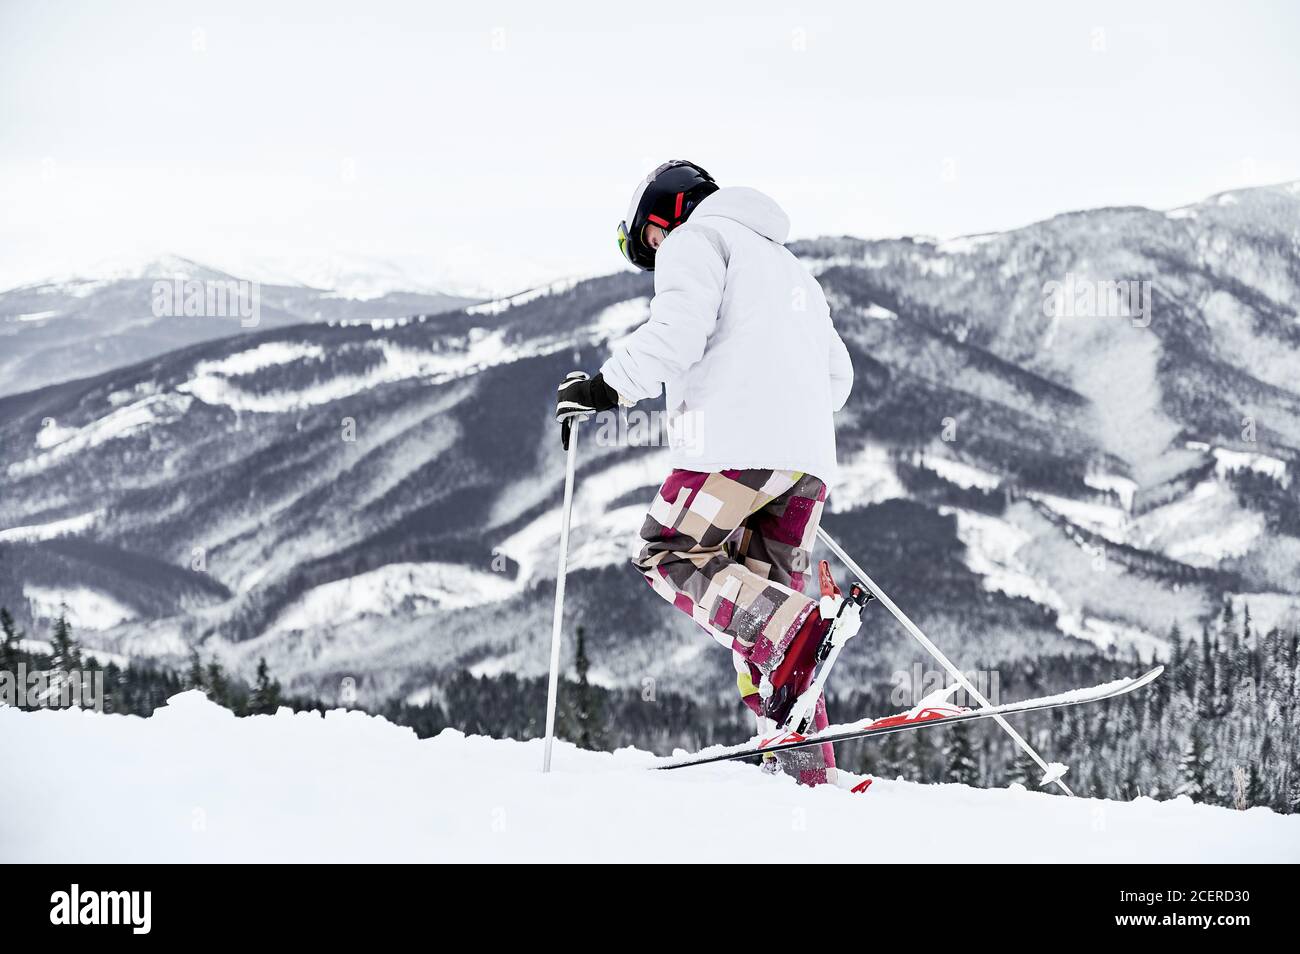 Skiing Outfit High Resolution Stock Photography and Images - Alamy